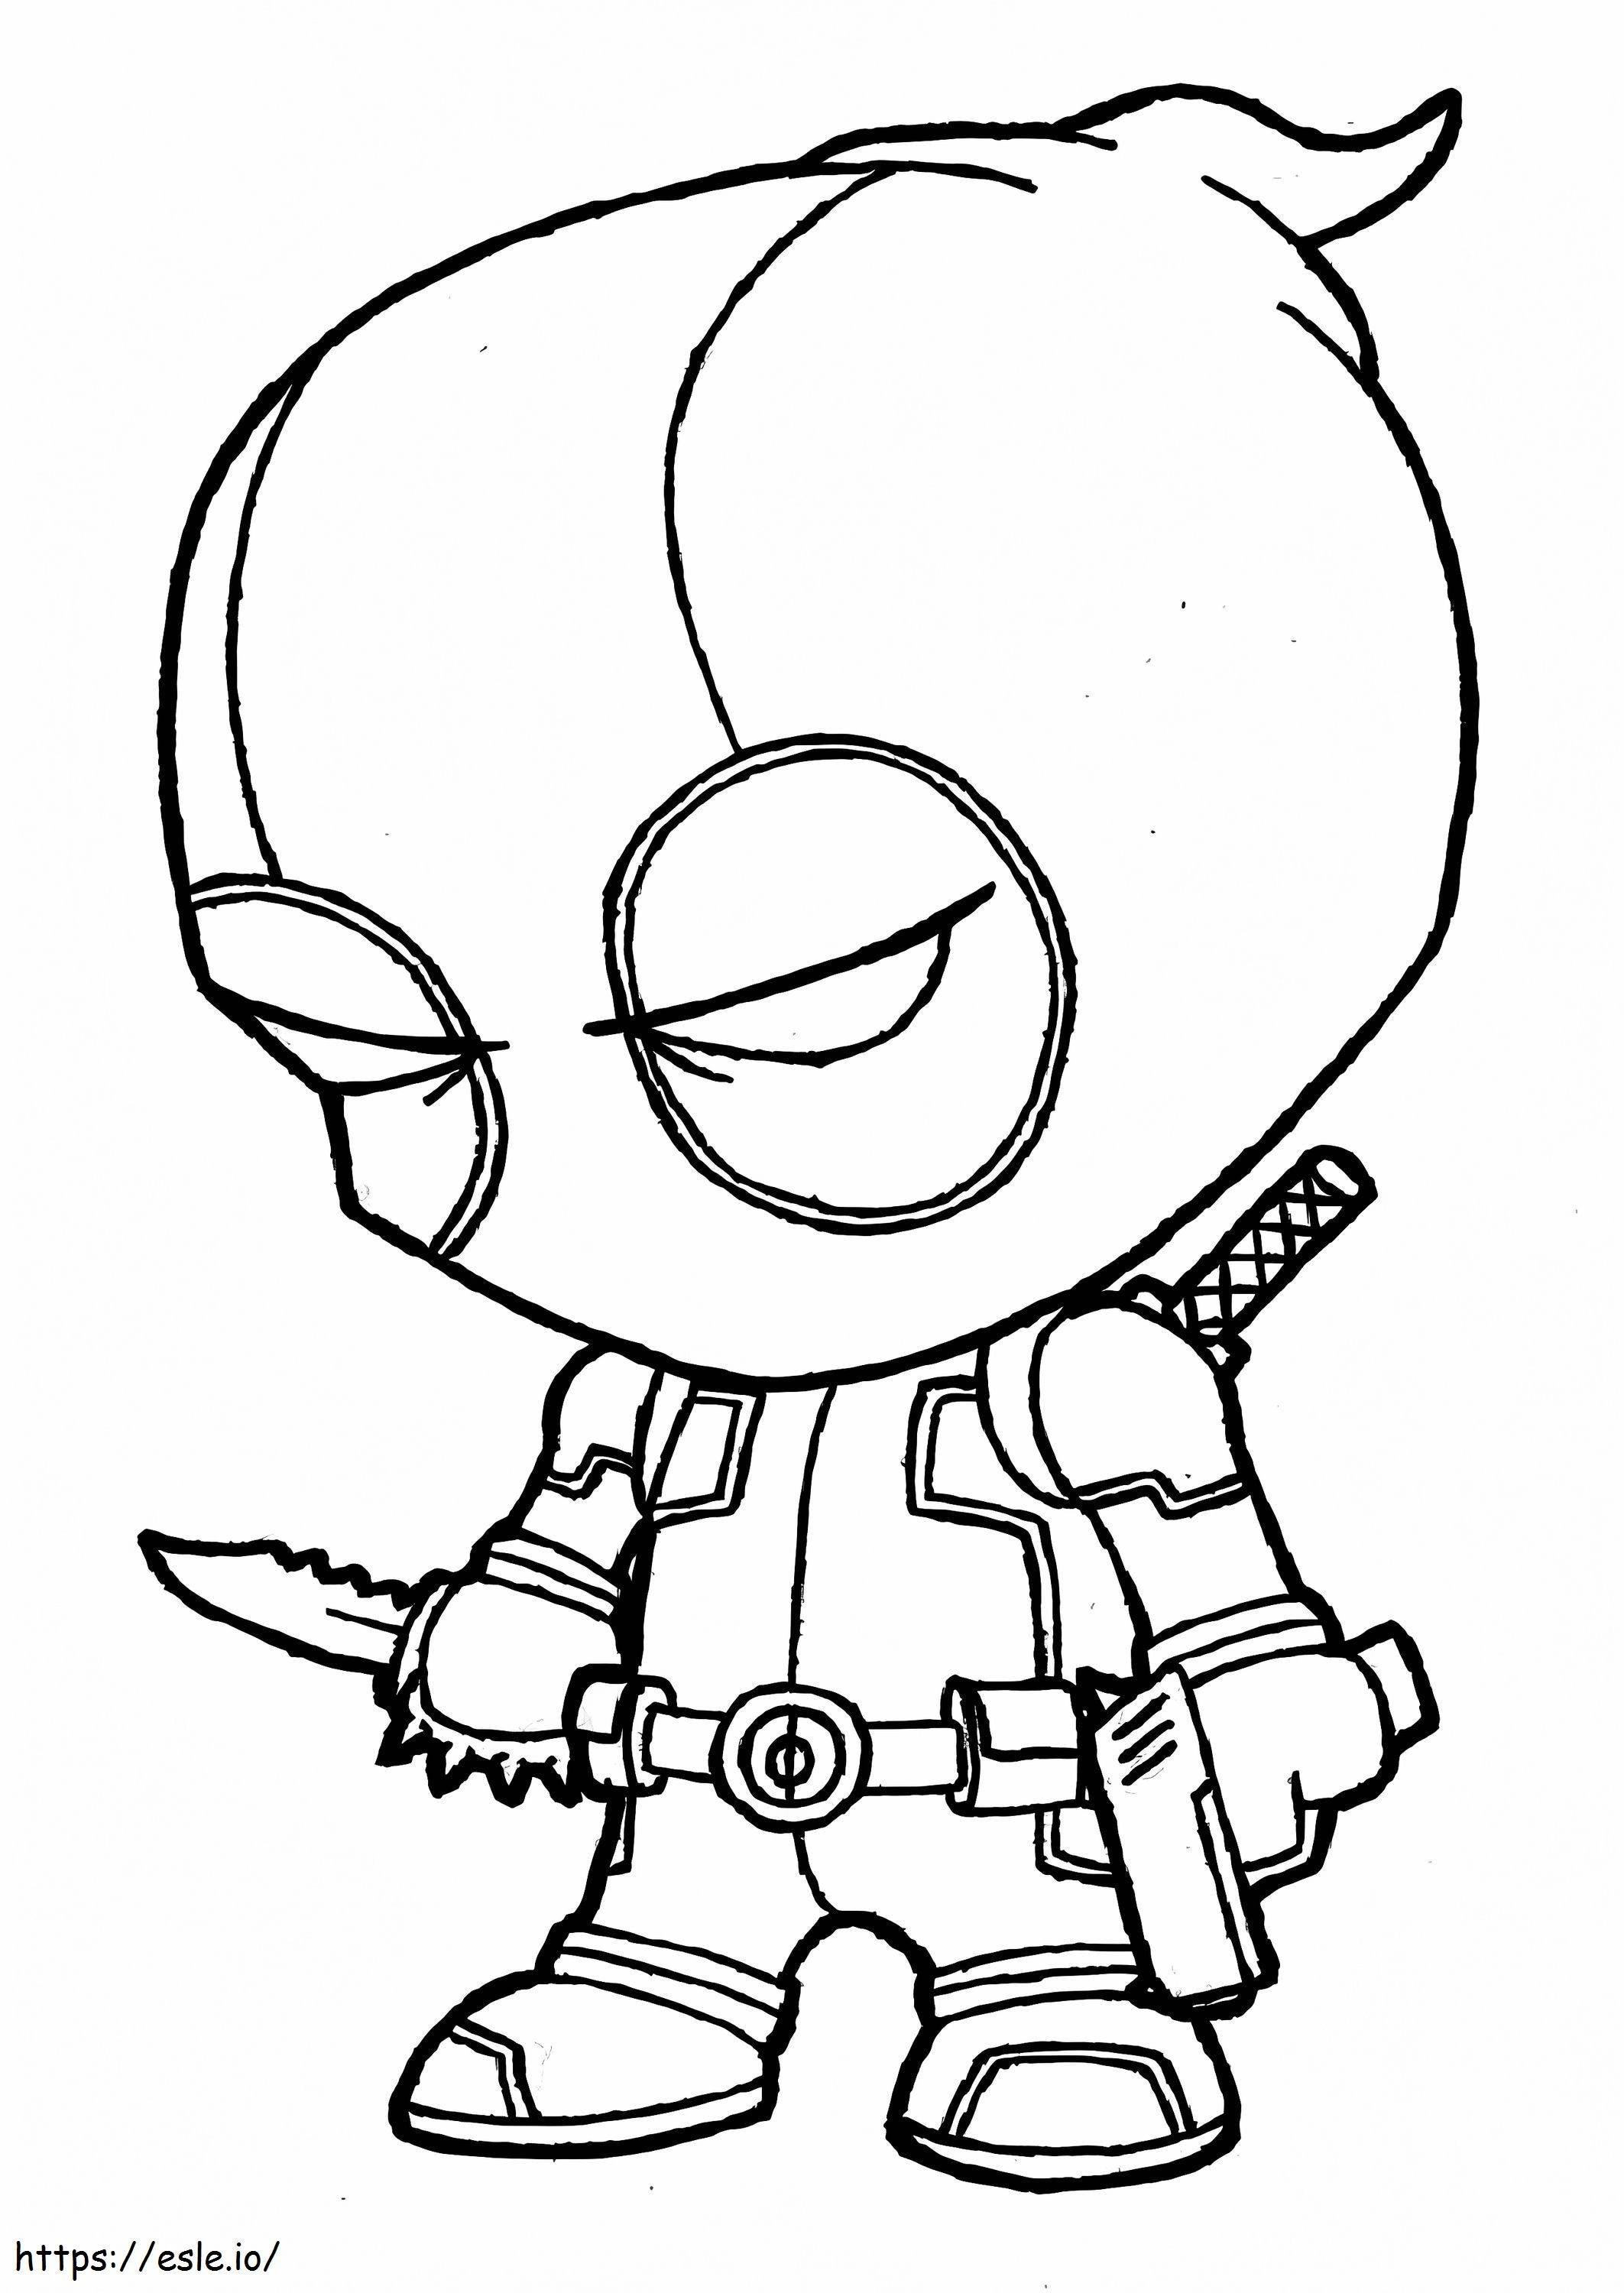 1531791025 Chibi Deadpool A4 coloring page